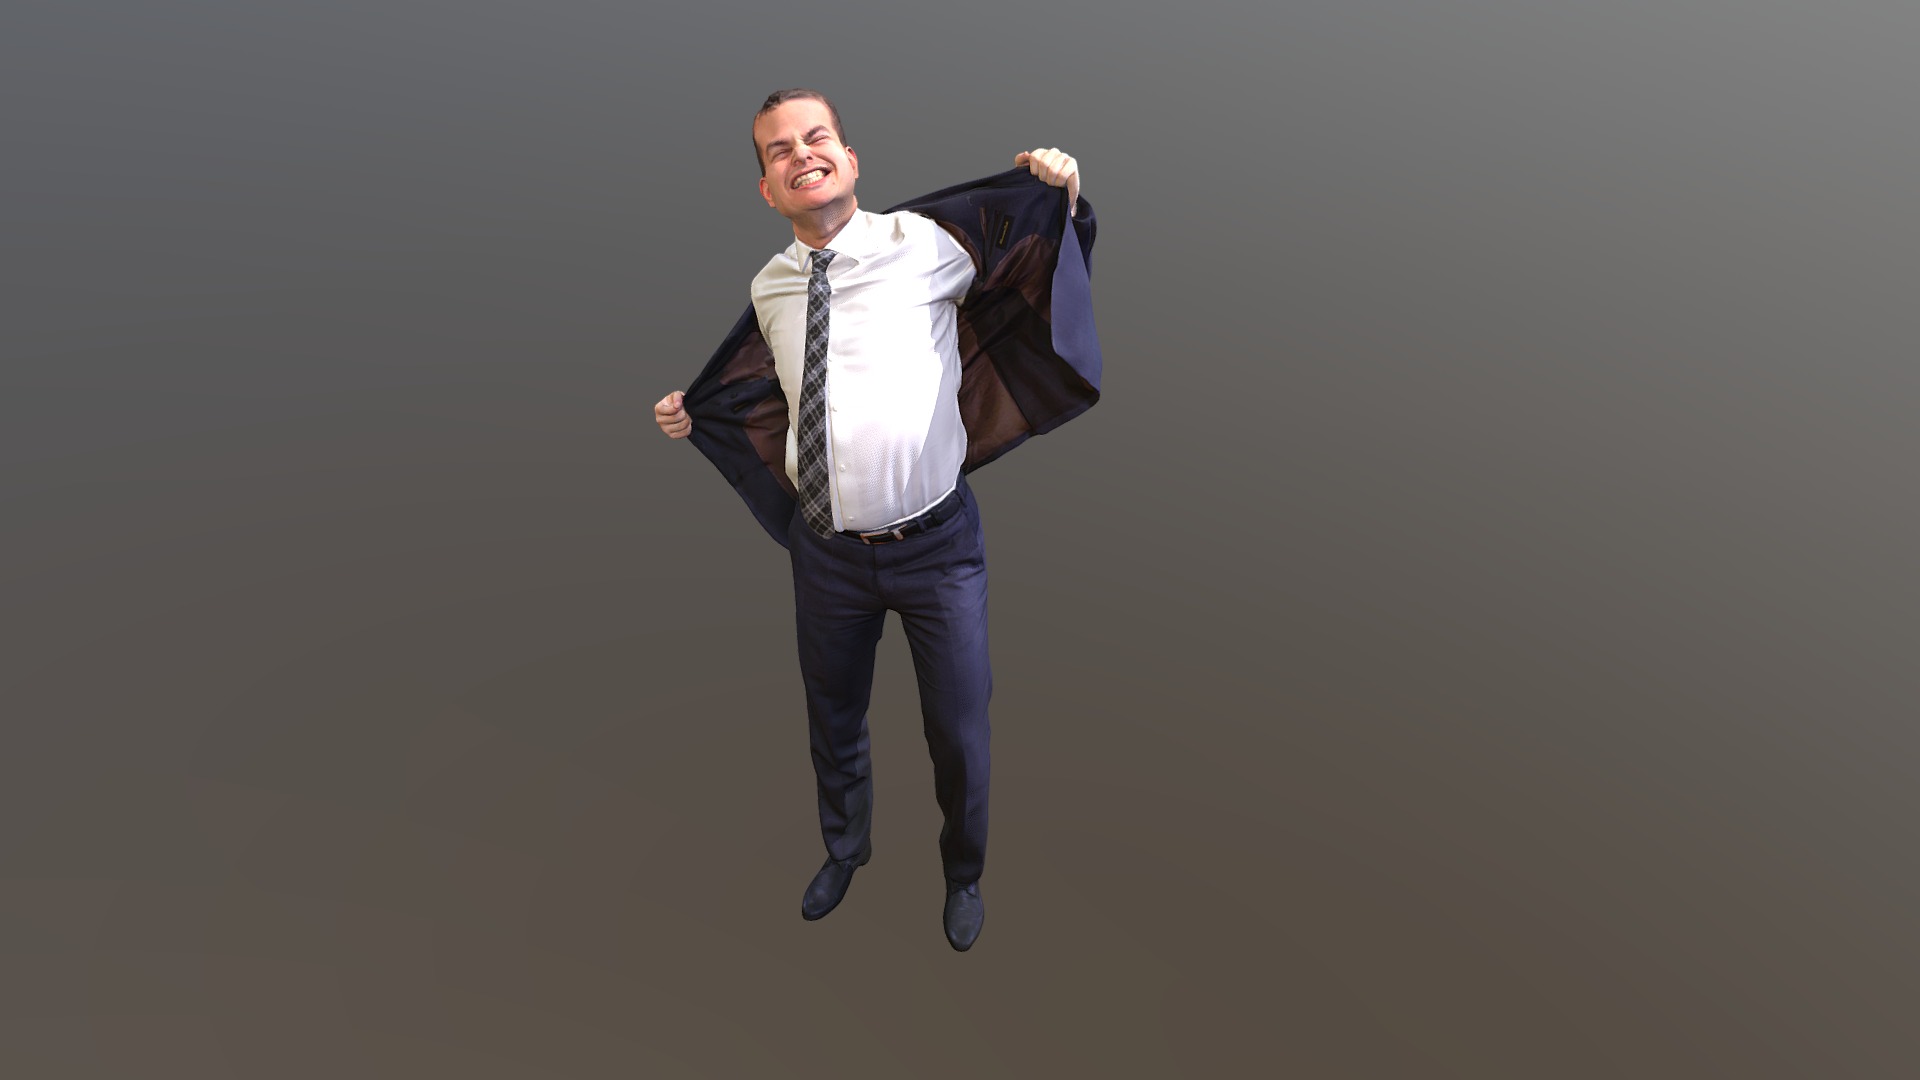 3D model No5 – Corporate Guy - This is a 3D model of the No5 - Corporate Guy. The 3D model is about a man in a suit and tie.